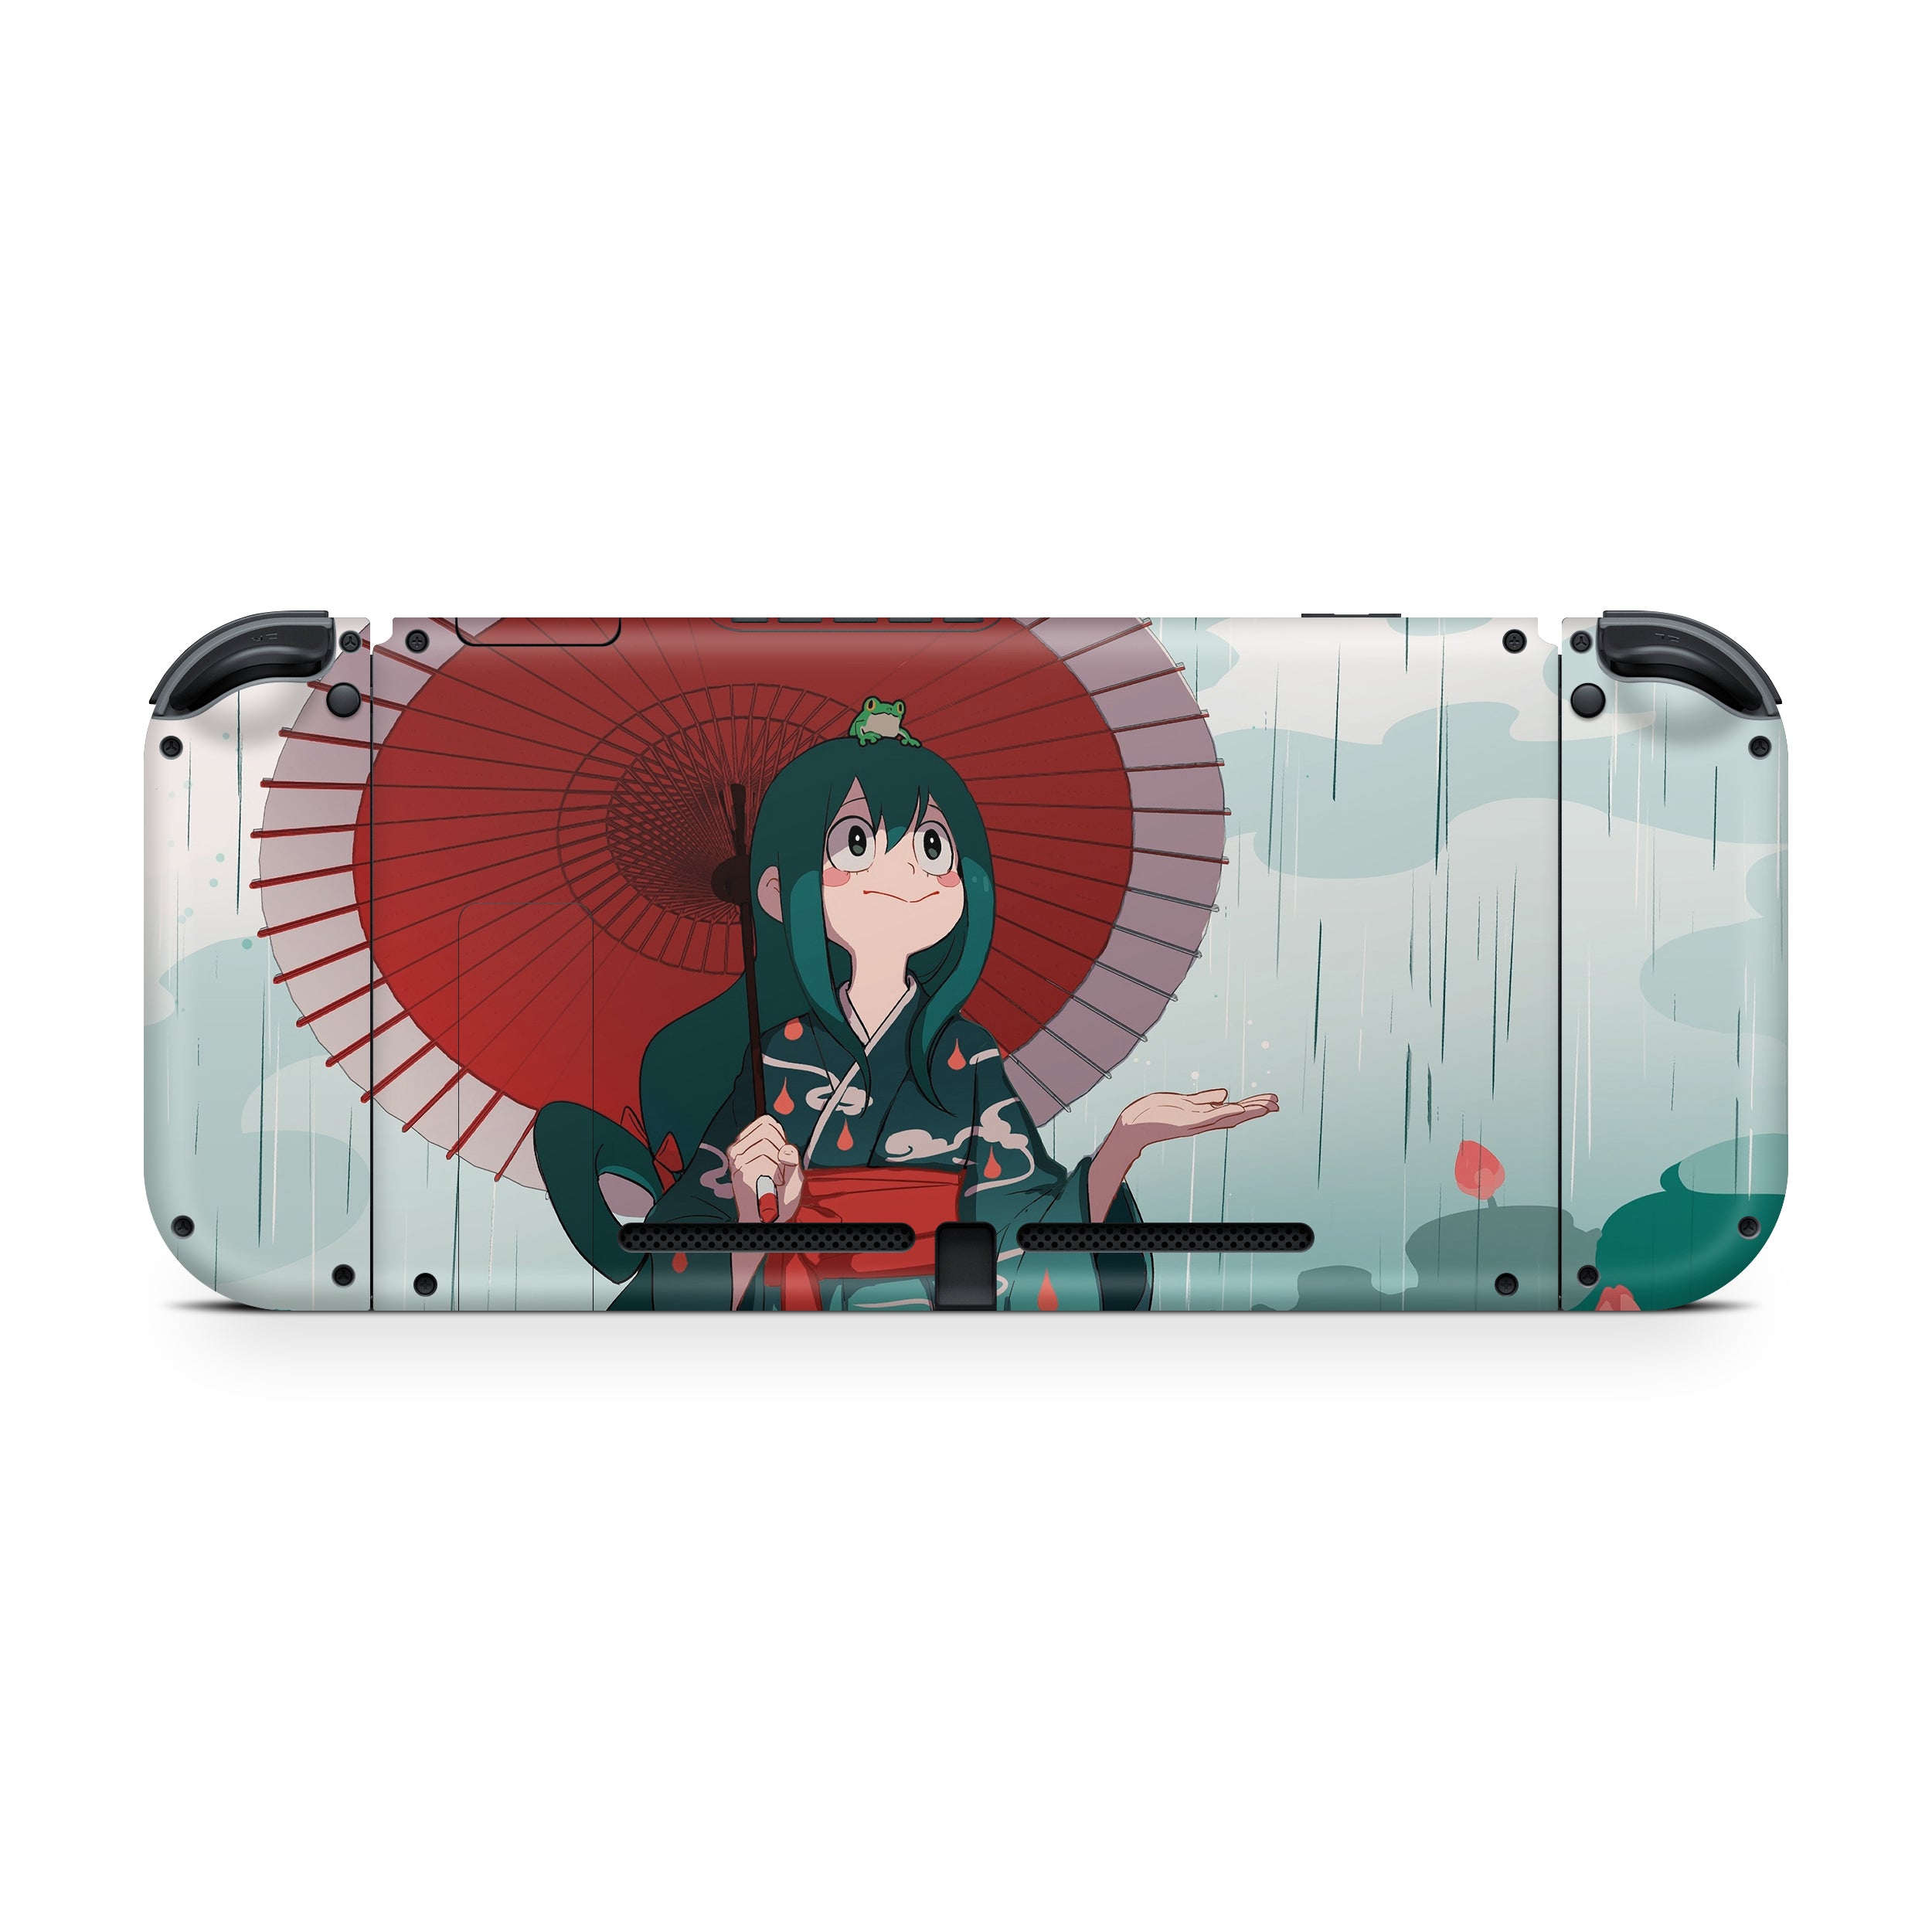 A video game skin featuring a My Hero Academia Tsuyu Asui design for the Nintendo Switch.